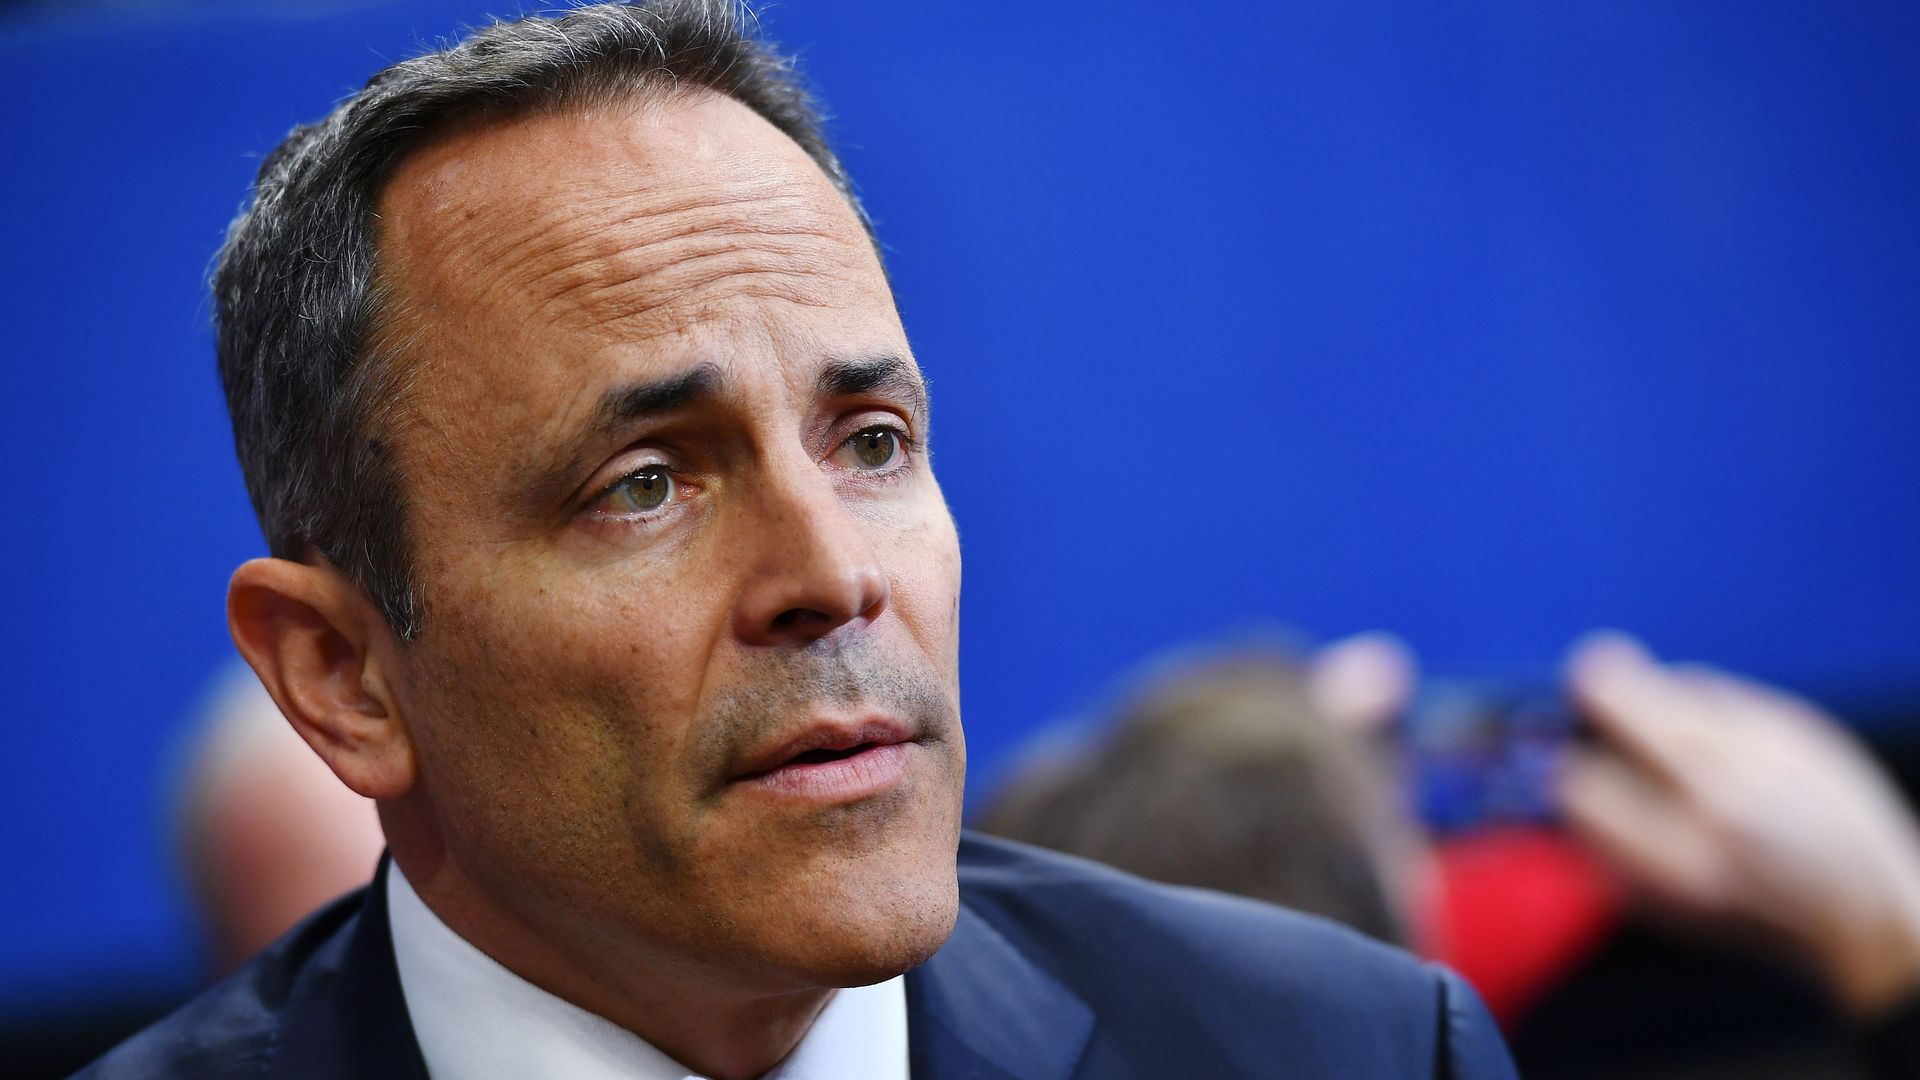 In this image, Matt Bevin wears a suit and tie